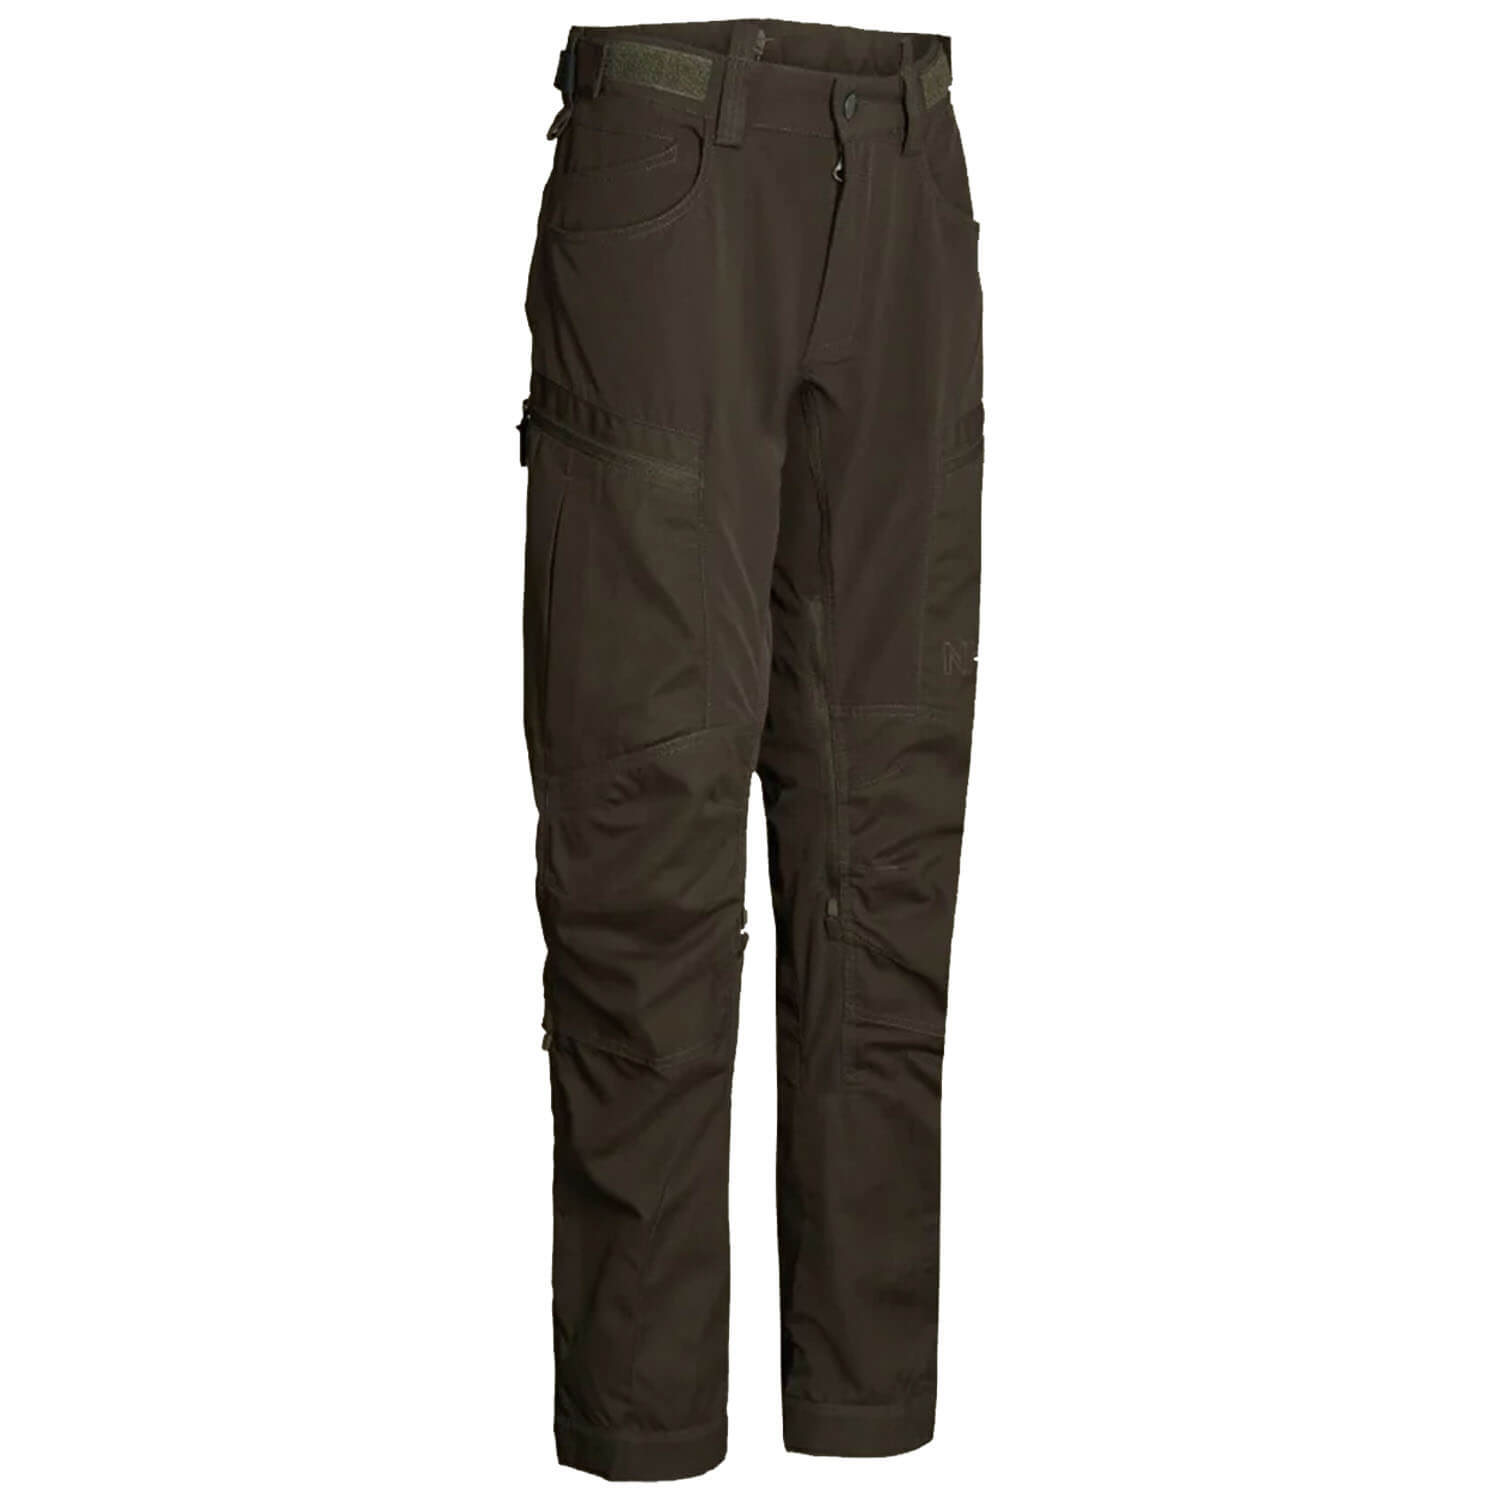 Northern Hunting womens trousers Tyra Pro - Hunting Trousers